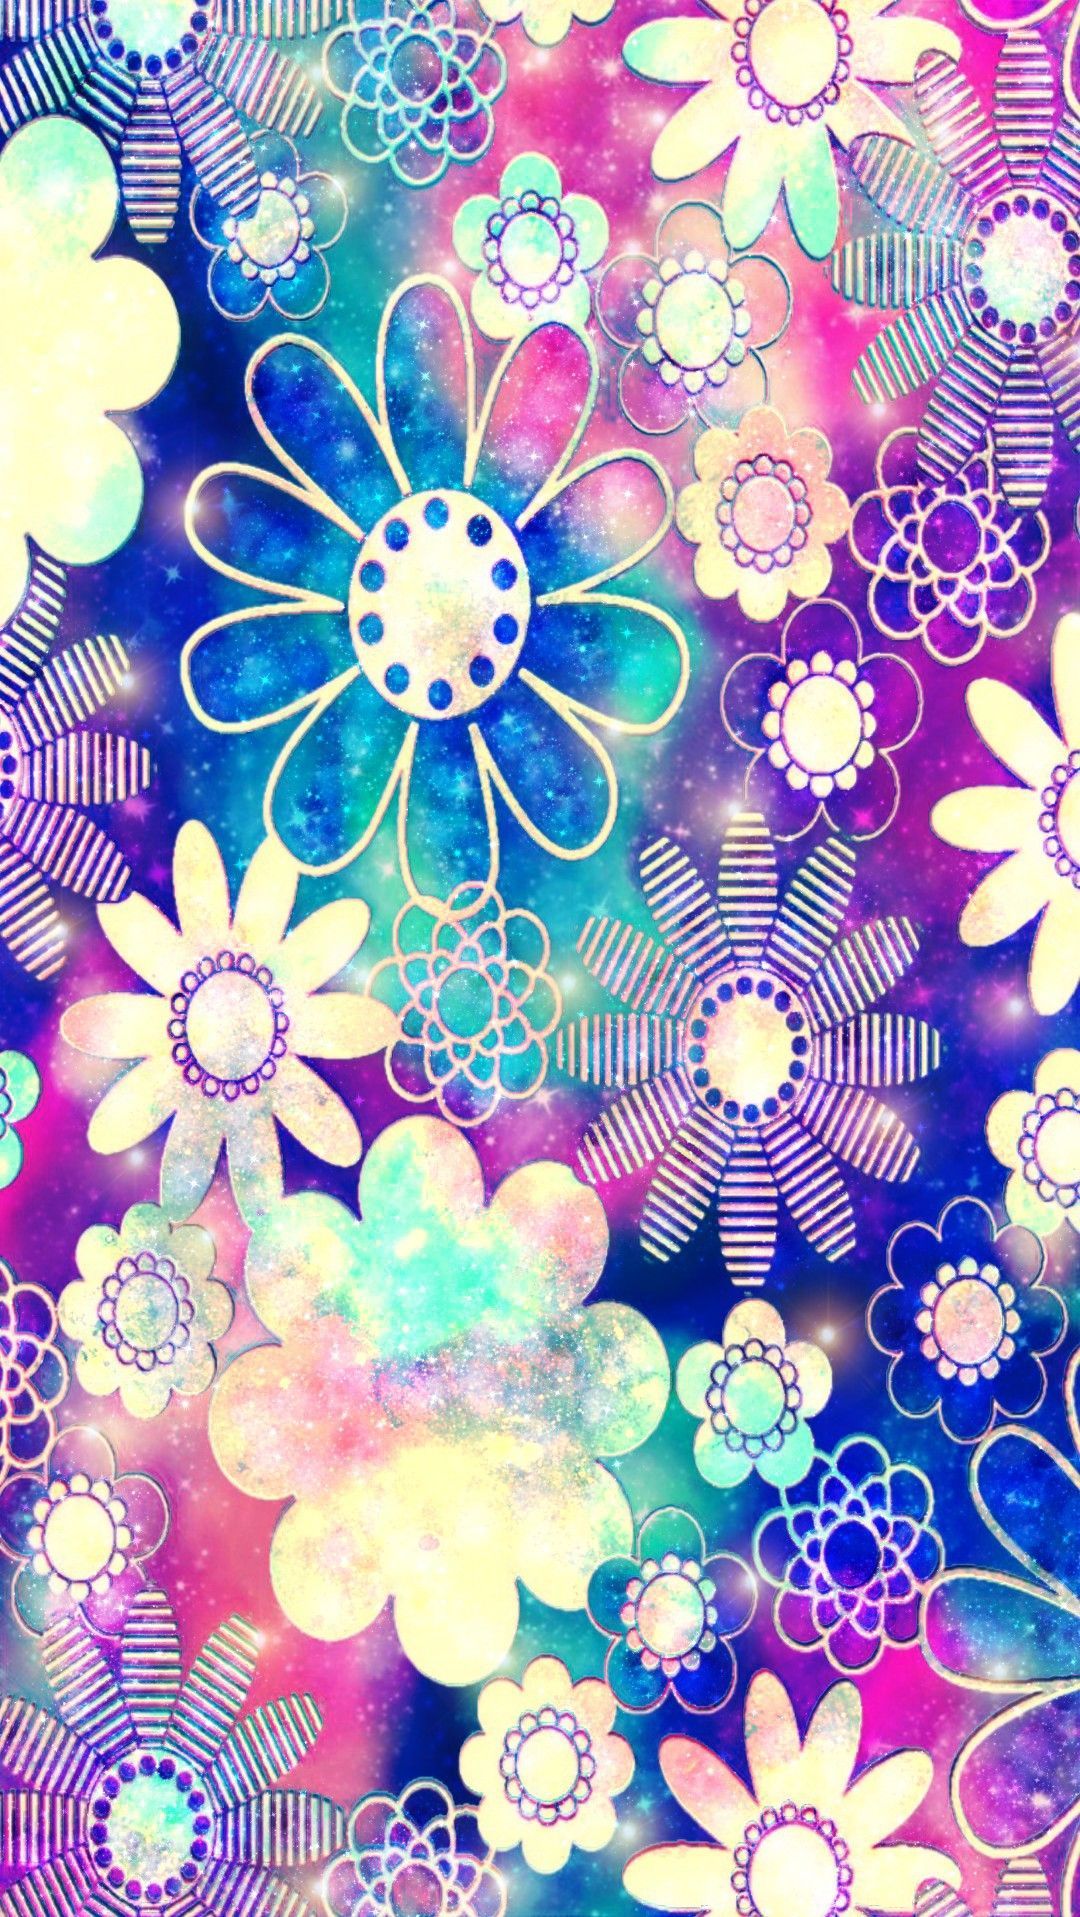 Flower Frenzy Galaxy, made by me #patterns #colorful #glitter #background #wallp. Flower background wallpaper, Flowers photography wallpaper, Background patterns